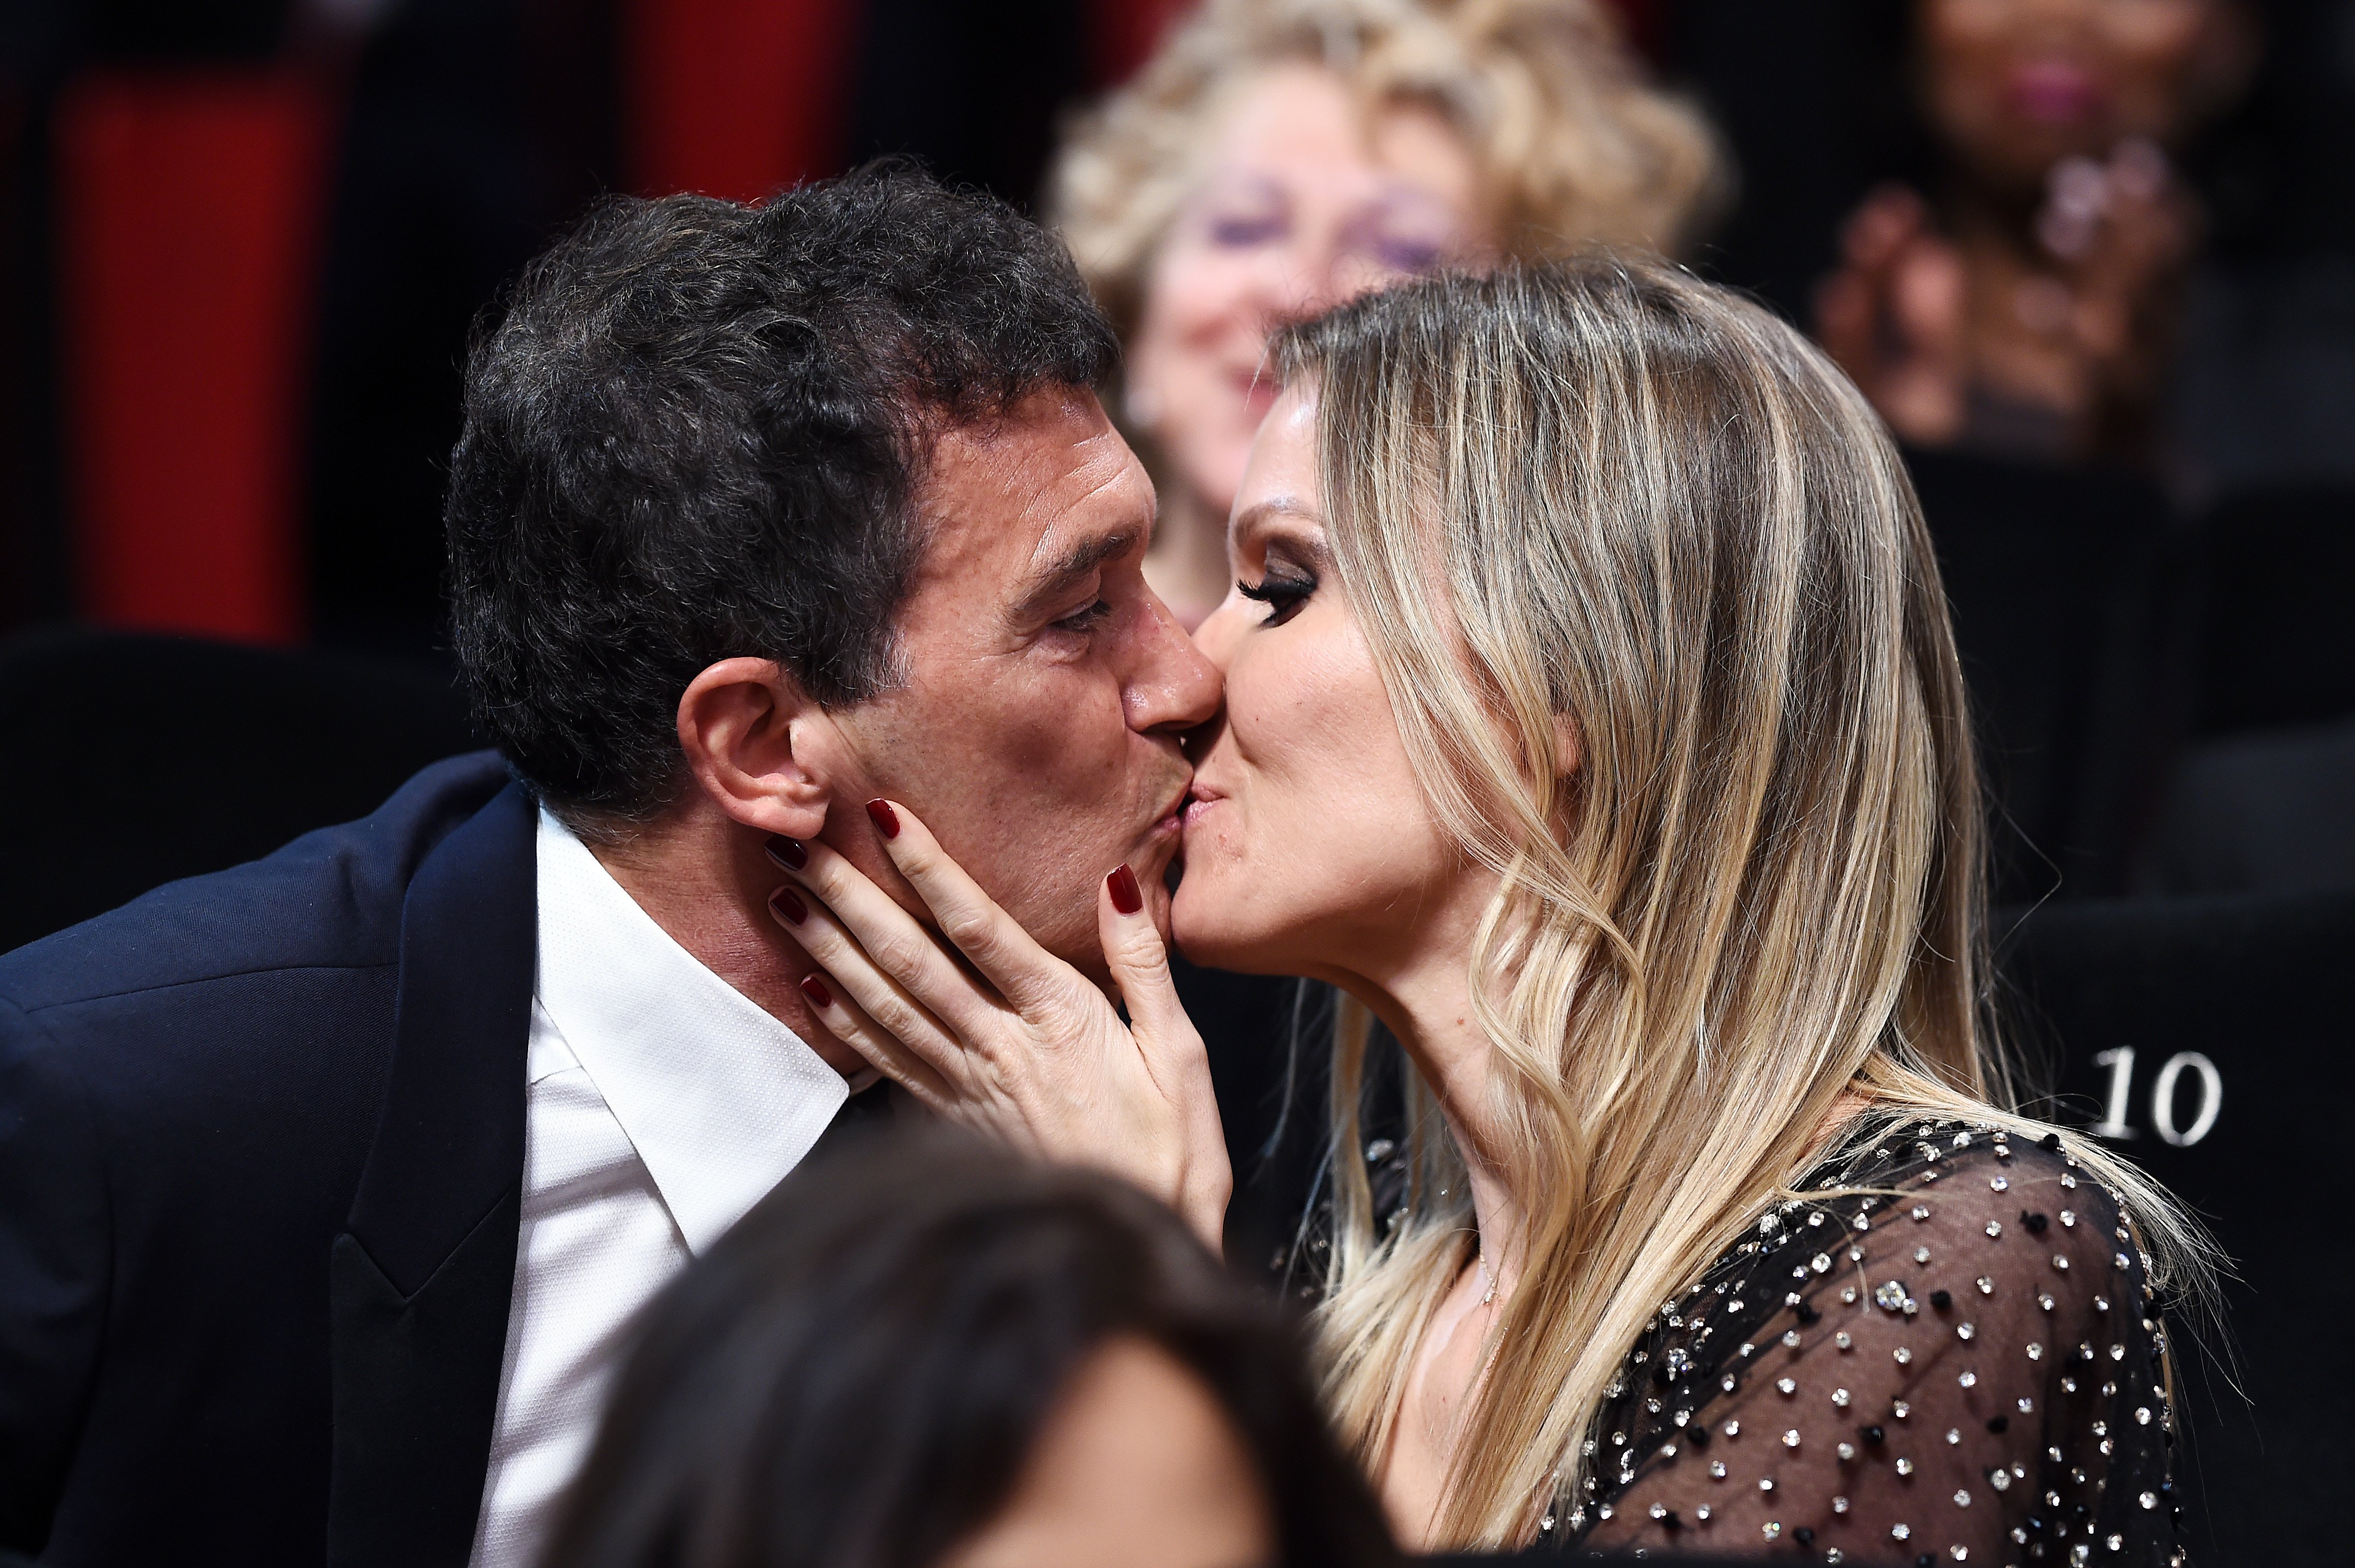 Antonio Banderas and Nicole Kimpel embrace after winning the Best Actor award for his role in "Dolor Y Gloria" at the Closing Ceremony during the 72nd annual Cannes Film Festival on May 25, 2019 in Cannes, France | Source: Getty Images 